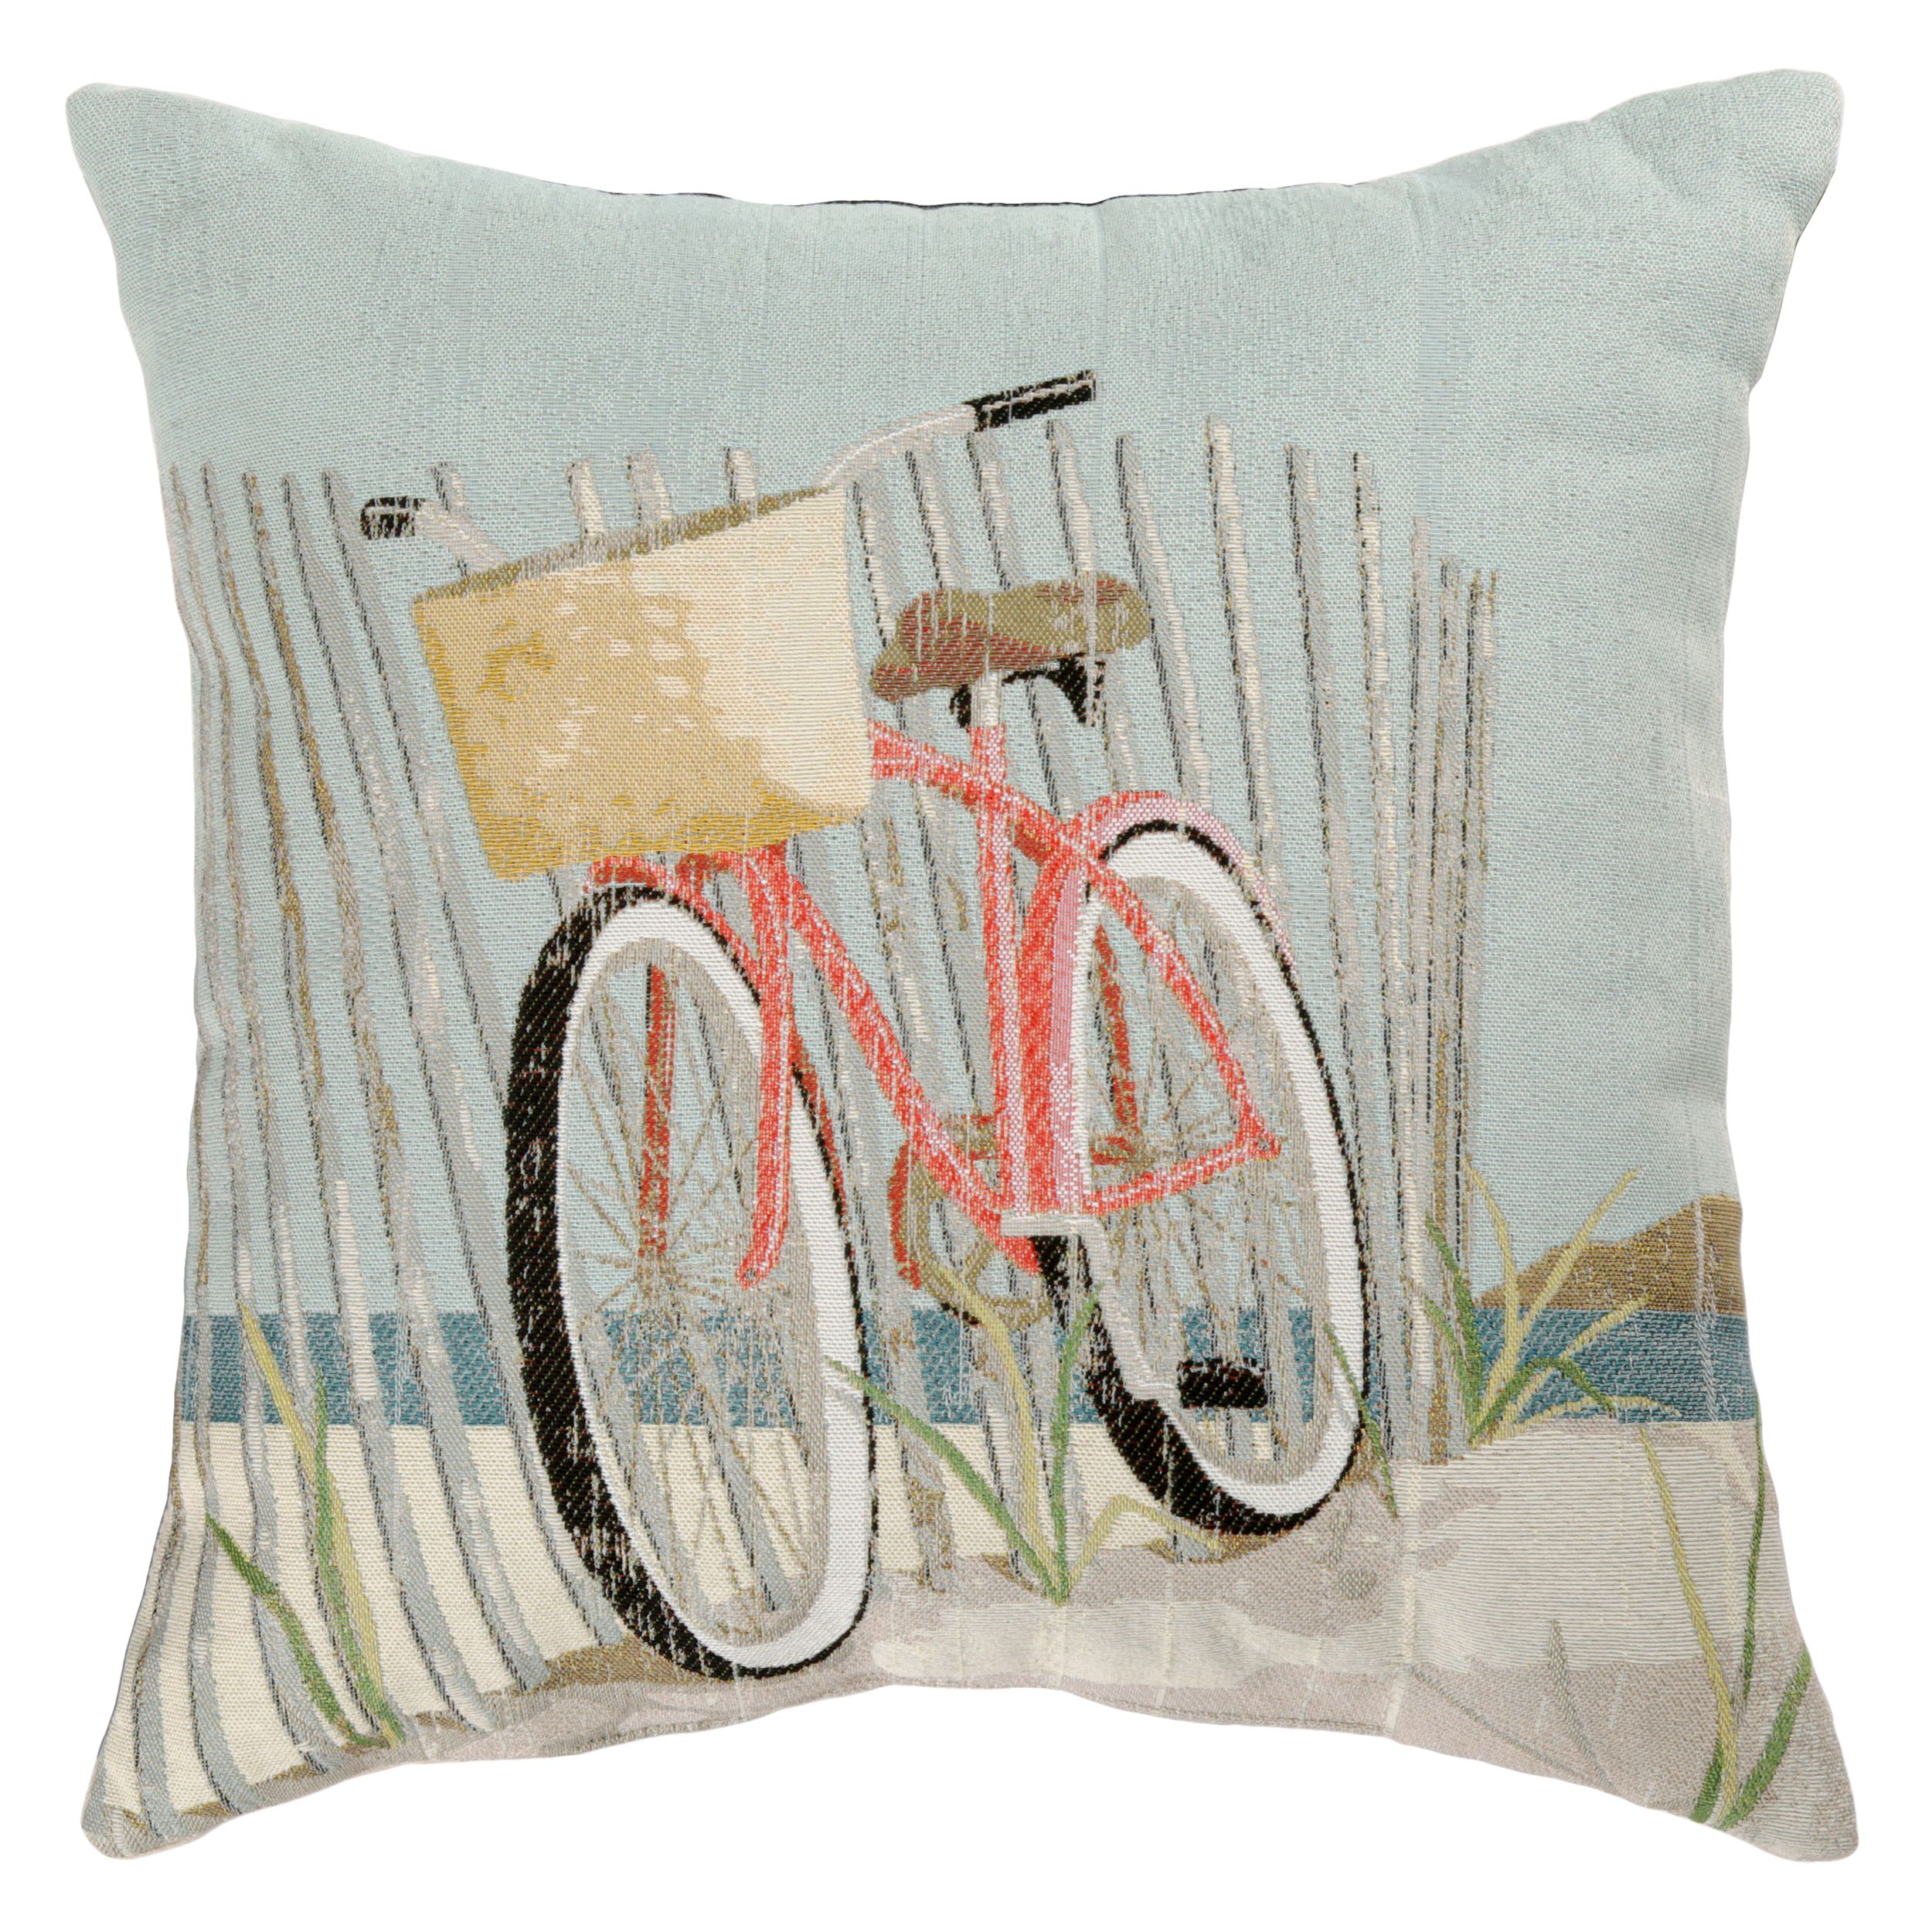 Better Homes & Gardens Jacquard Beach Bicycle Decorative Throw Pillow, Size 18" x 18", Square - image 1 of 4